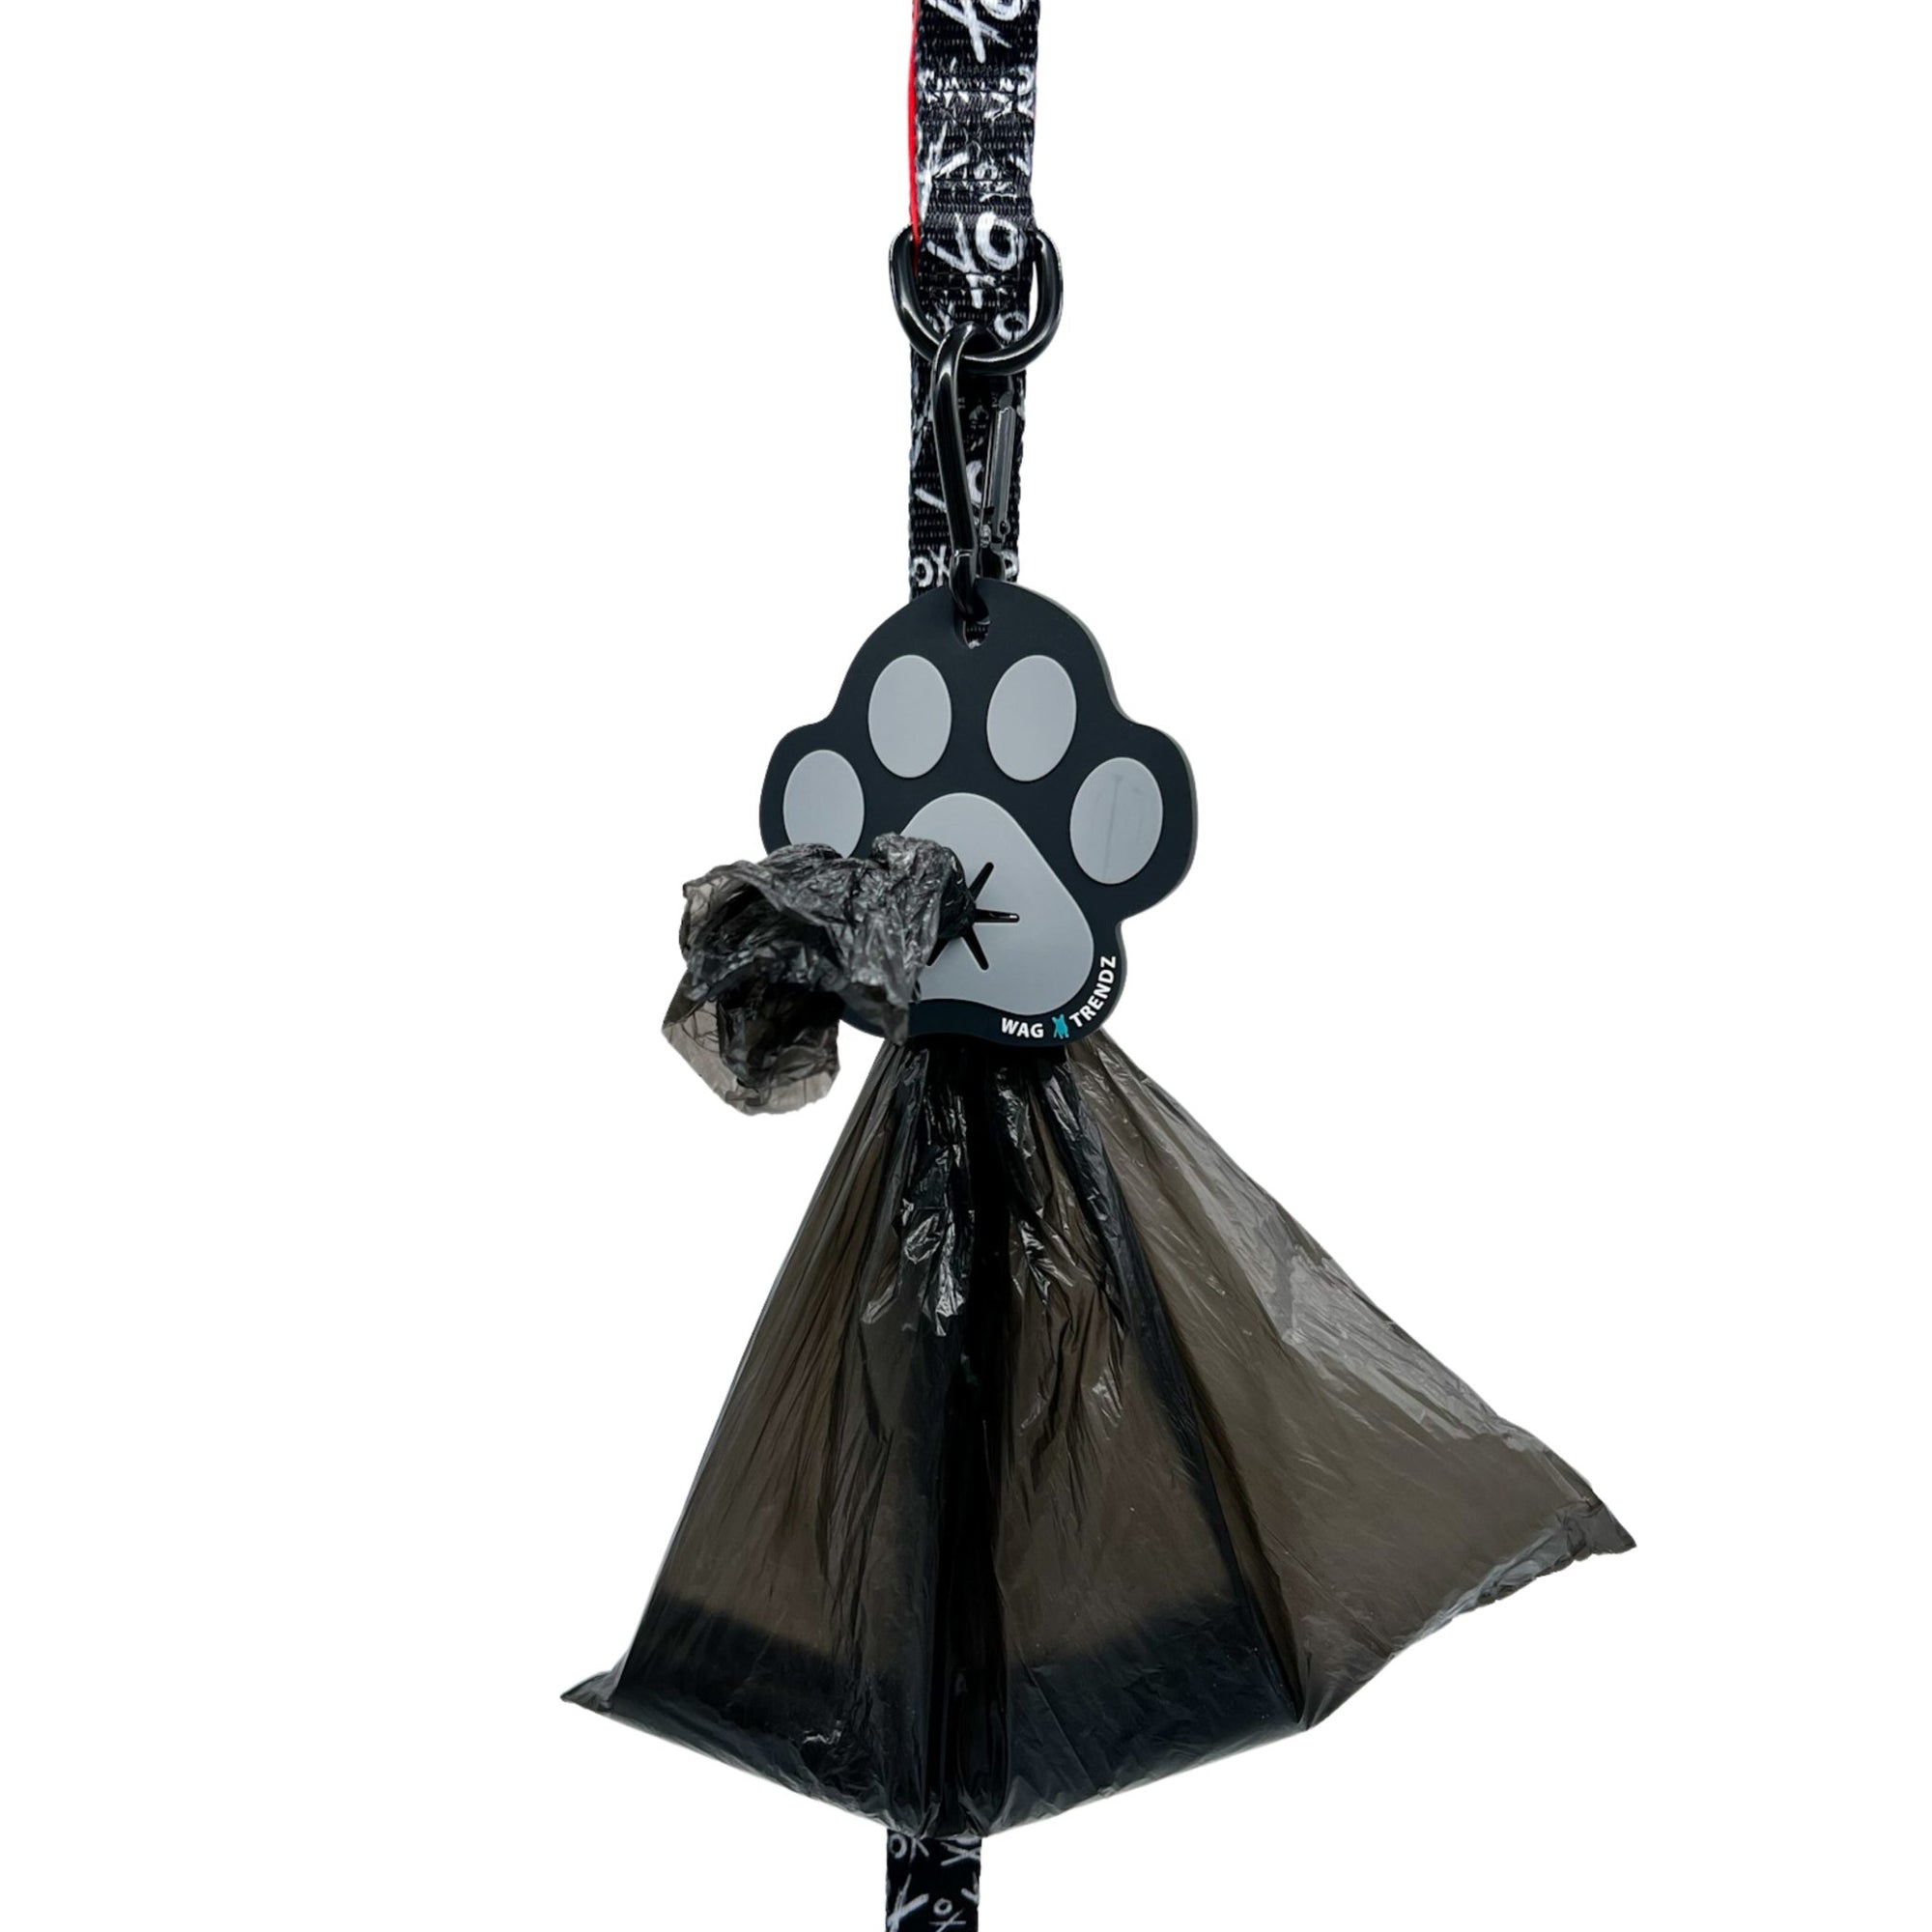 Poop Buddy - black and gray resin dog paw - hanging on a black &amp; white XO dog leash with red accents and black plastic bag carrying poop pushed through hole - against white background - Wag Trendz